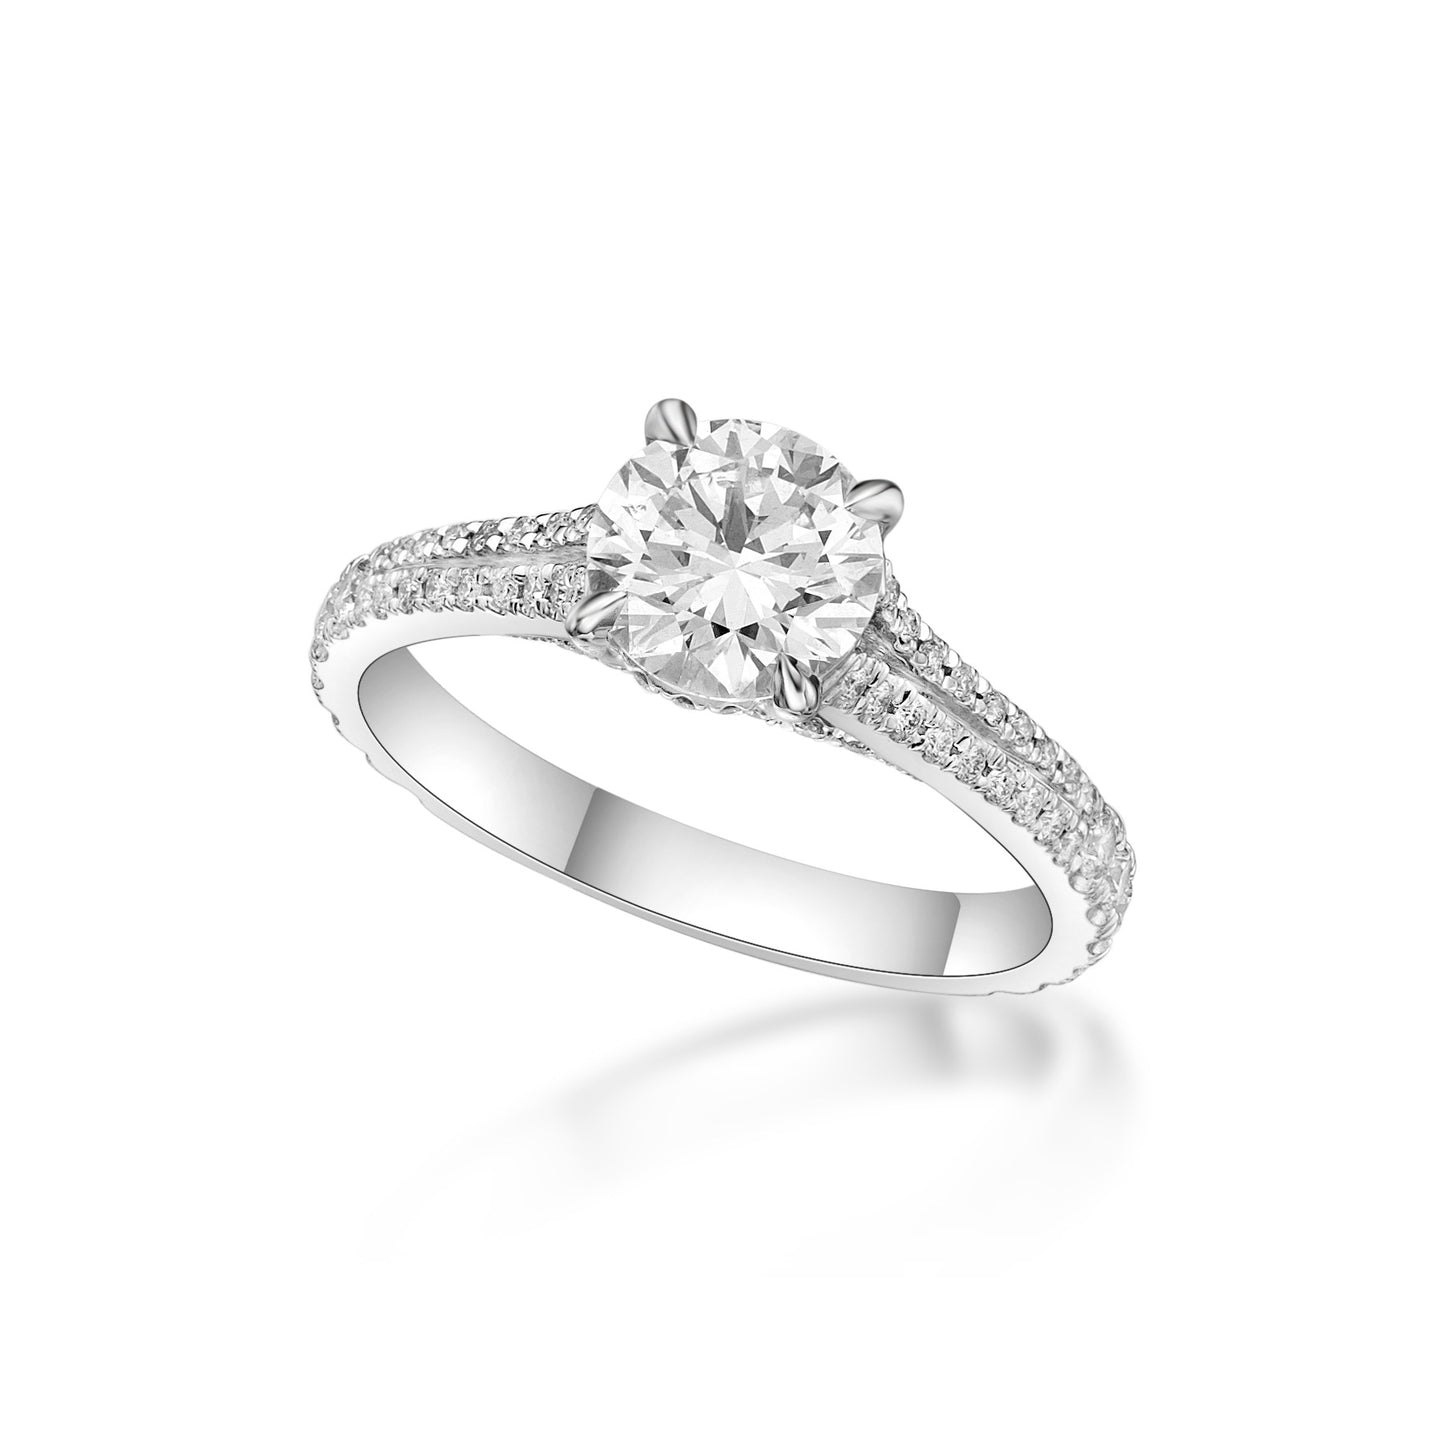 1.01ct Round Brilliant diamond in an 18K White Gold engagement ring setting with Split Shank Band4-claw setting with split-shank diamond eternity band